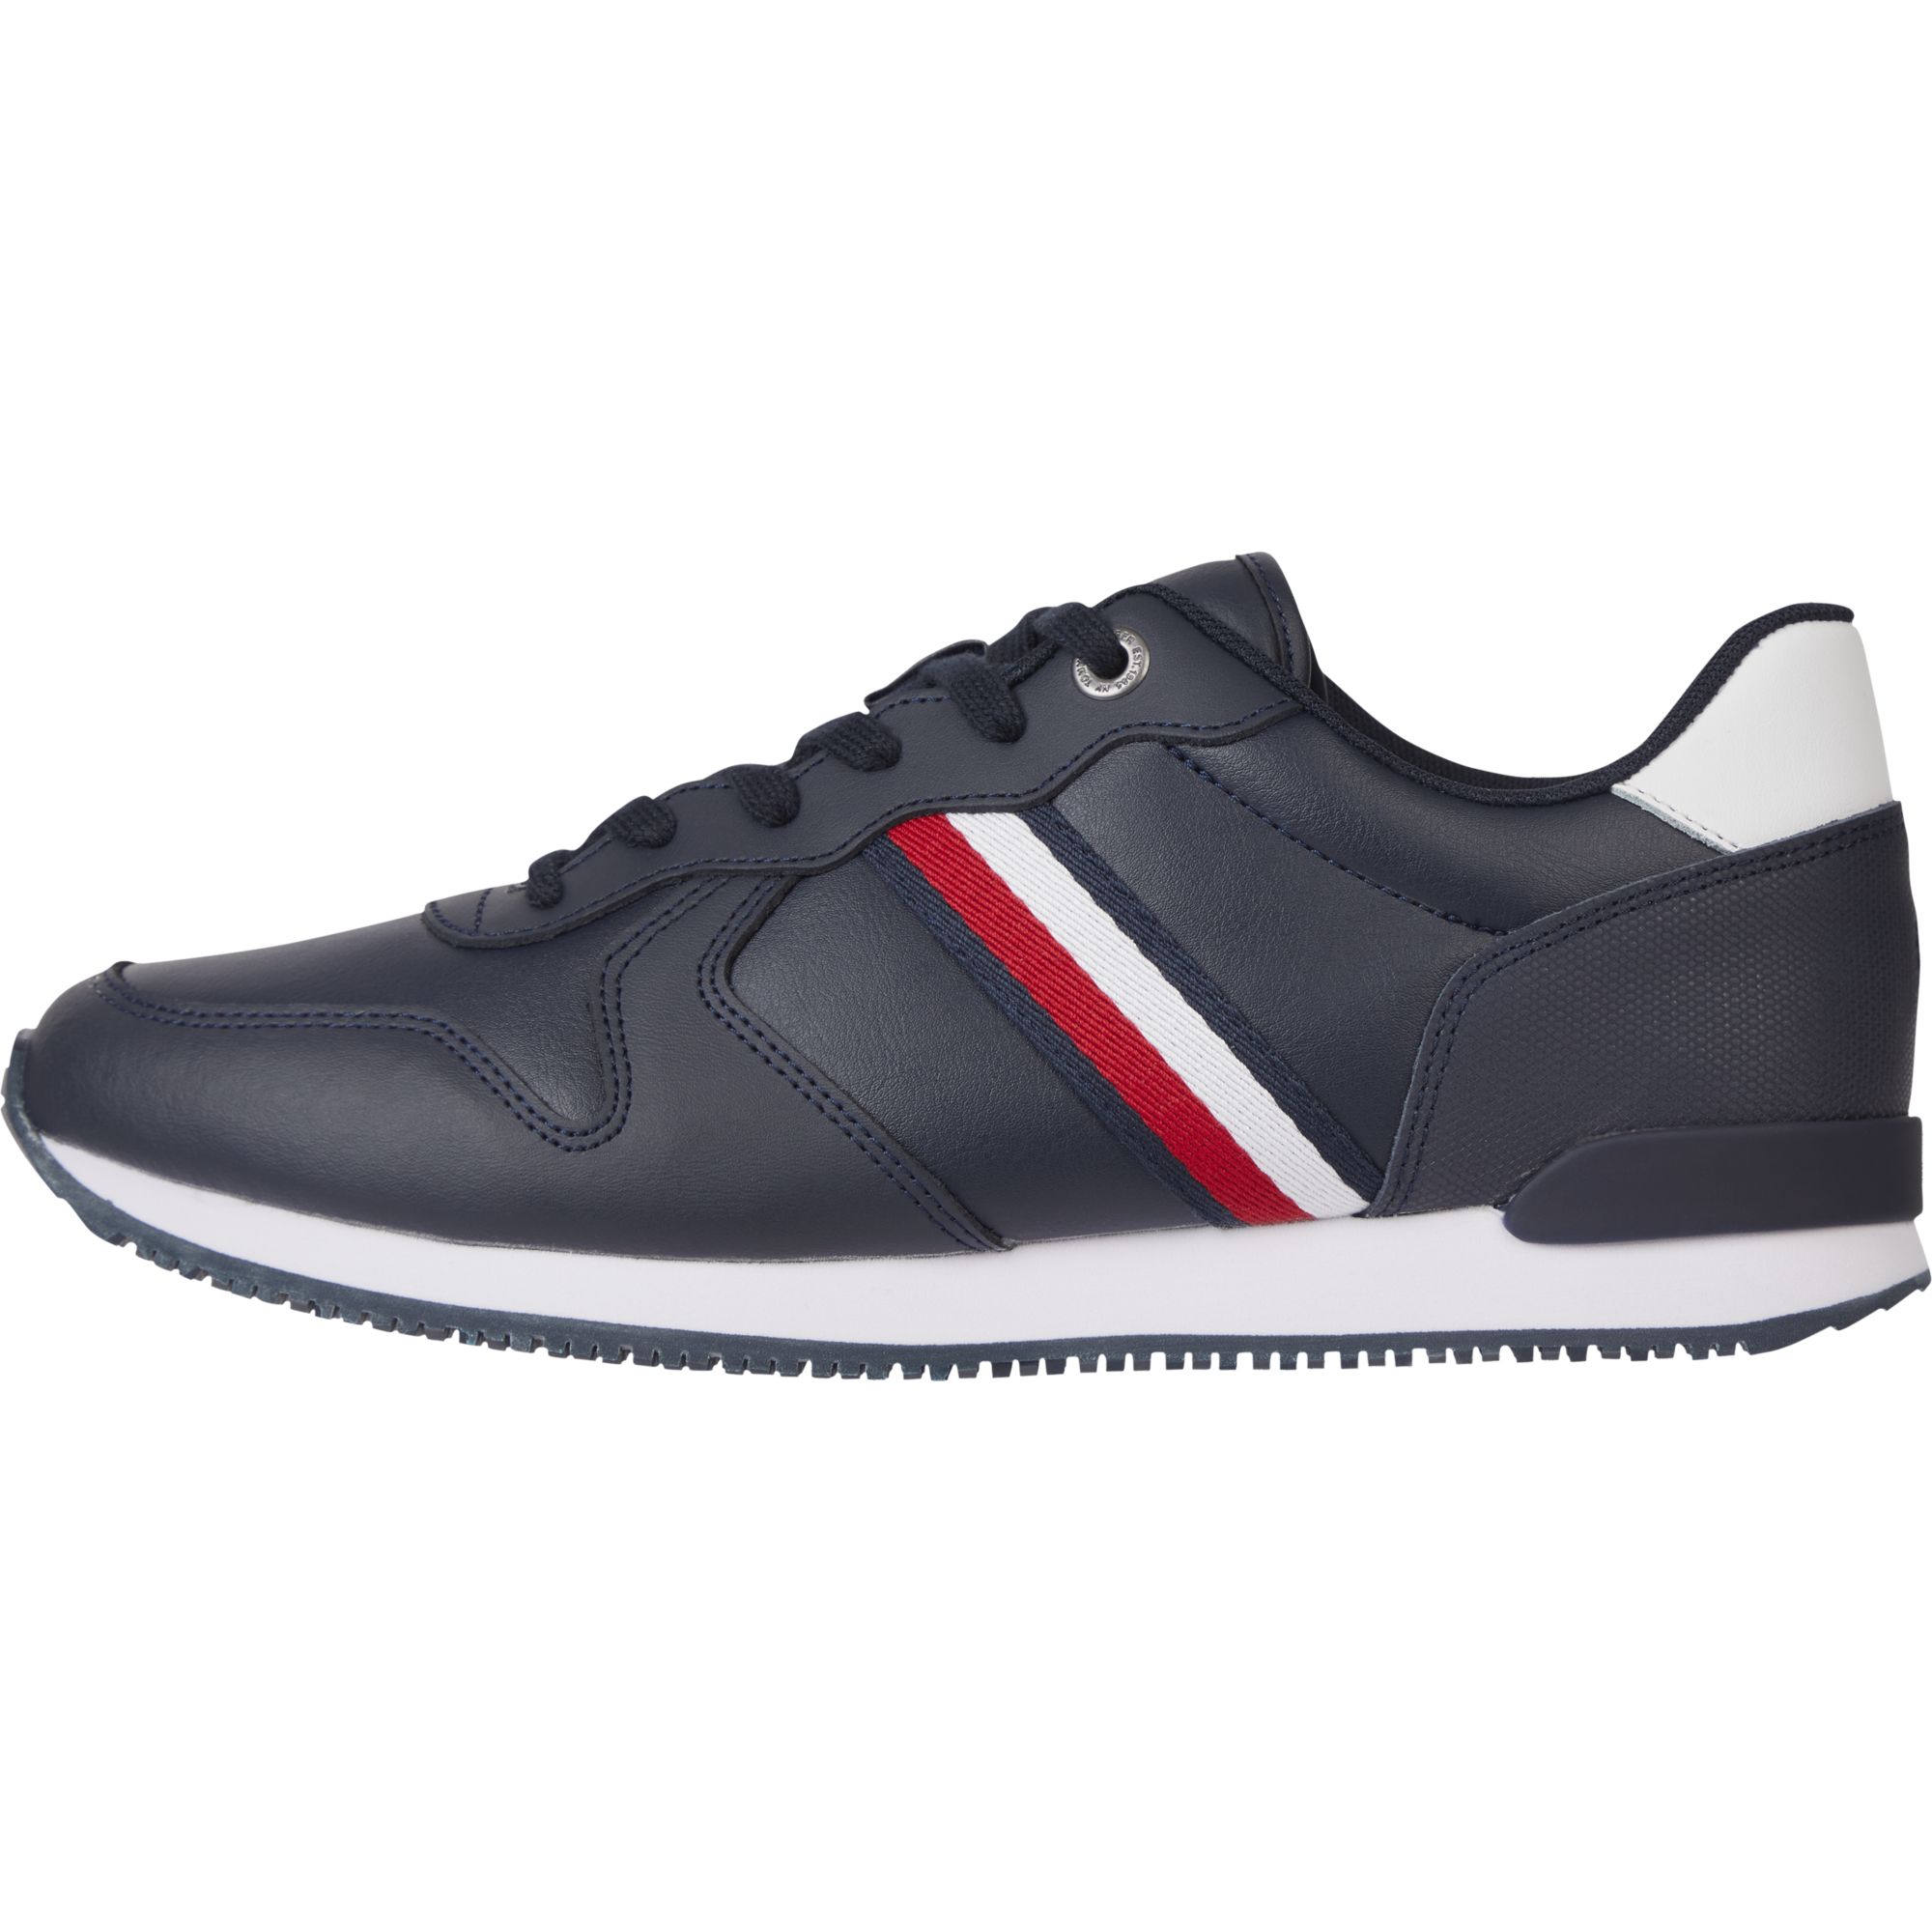 Iconic Runner Leather Casual